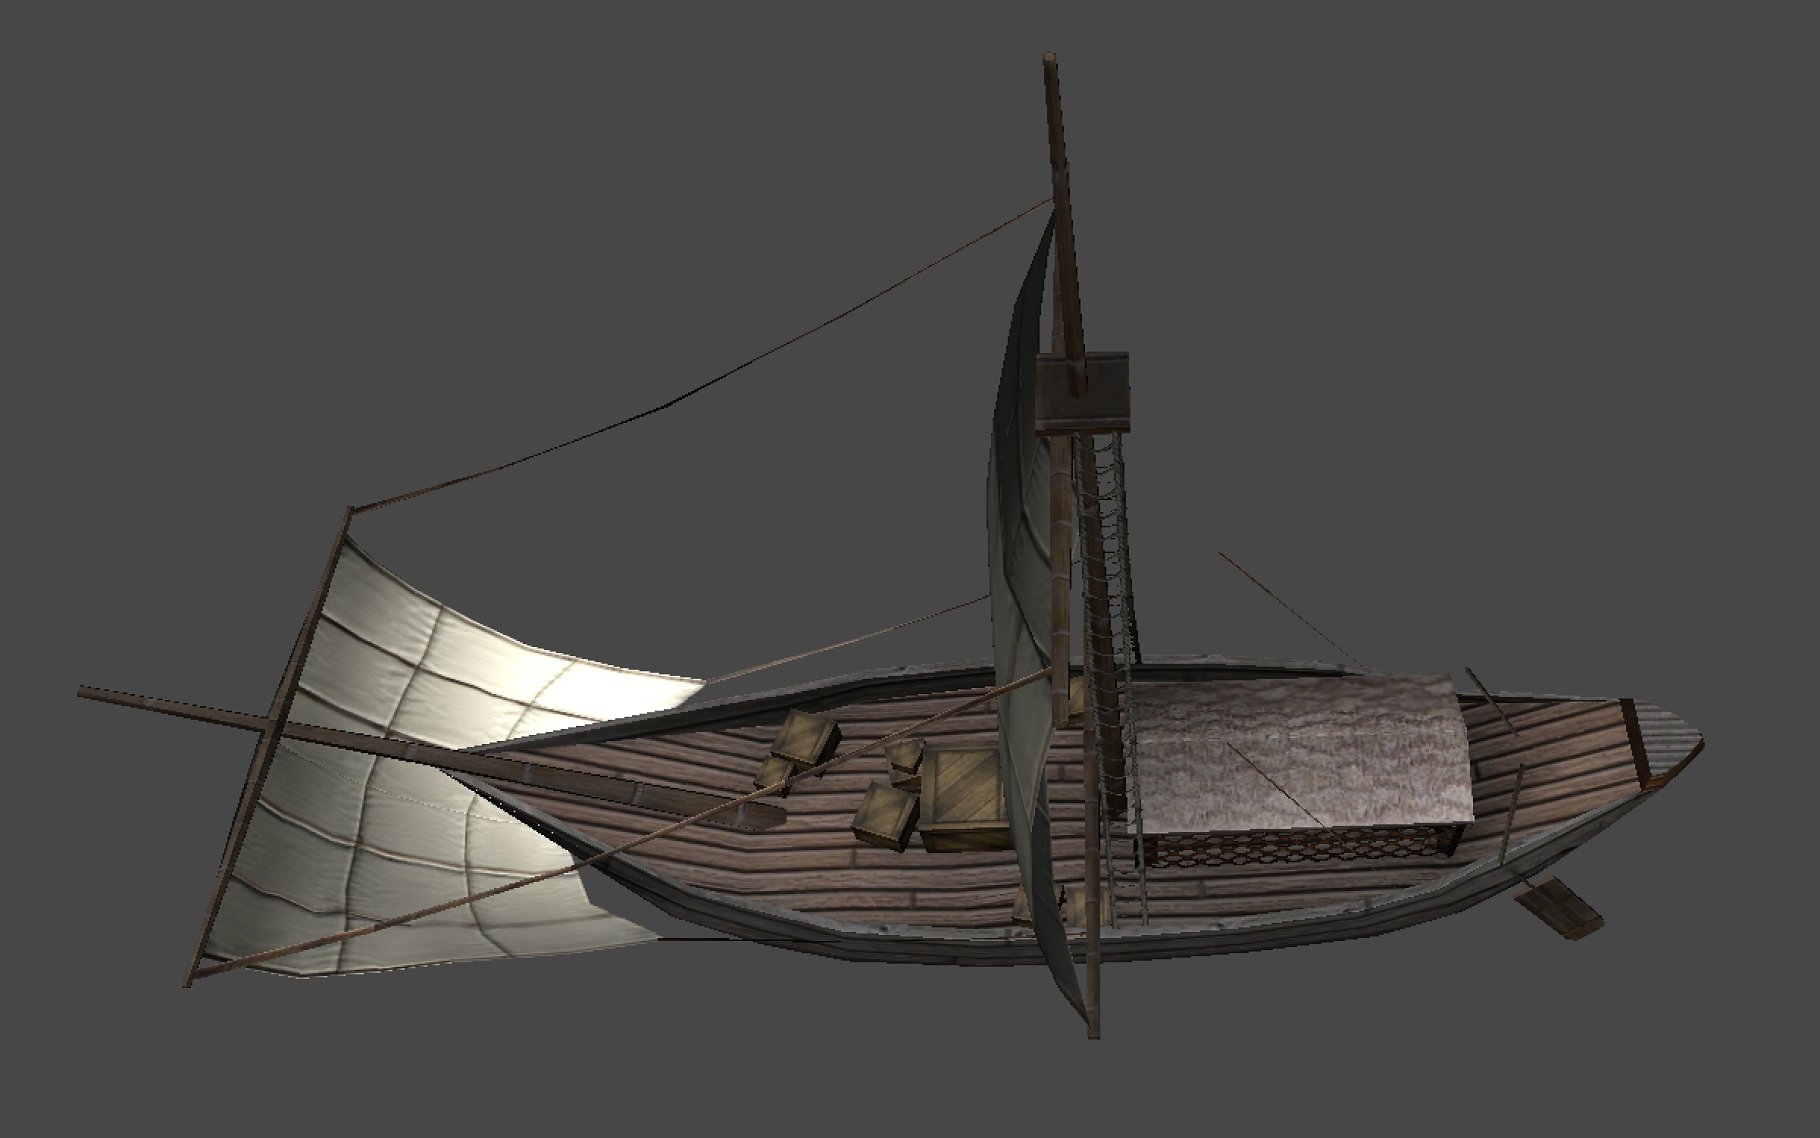 Roman ship mockup on a dark gray background from above.